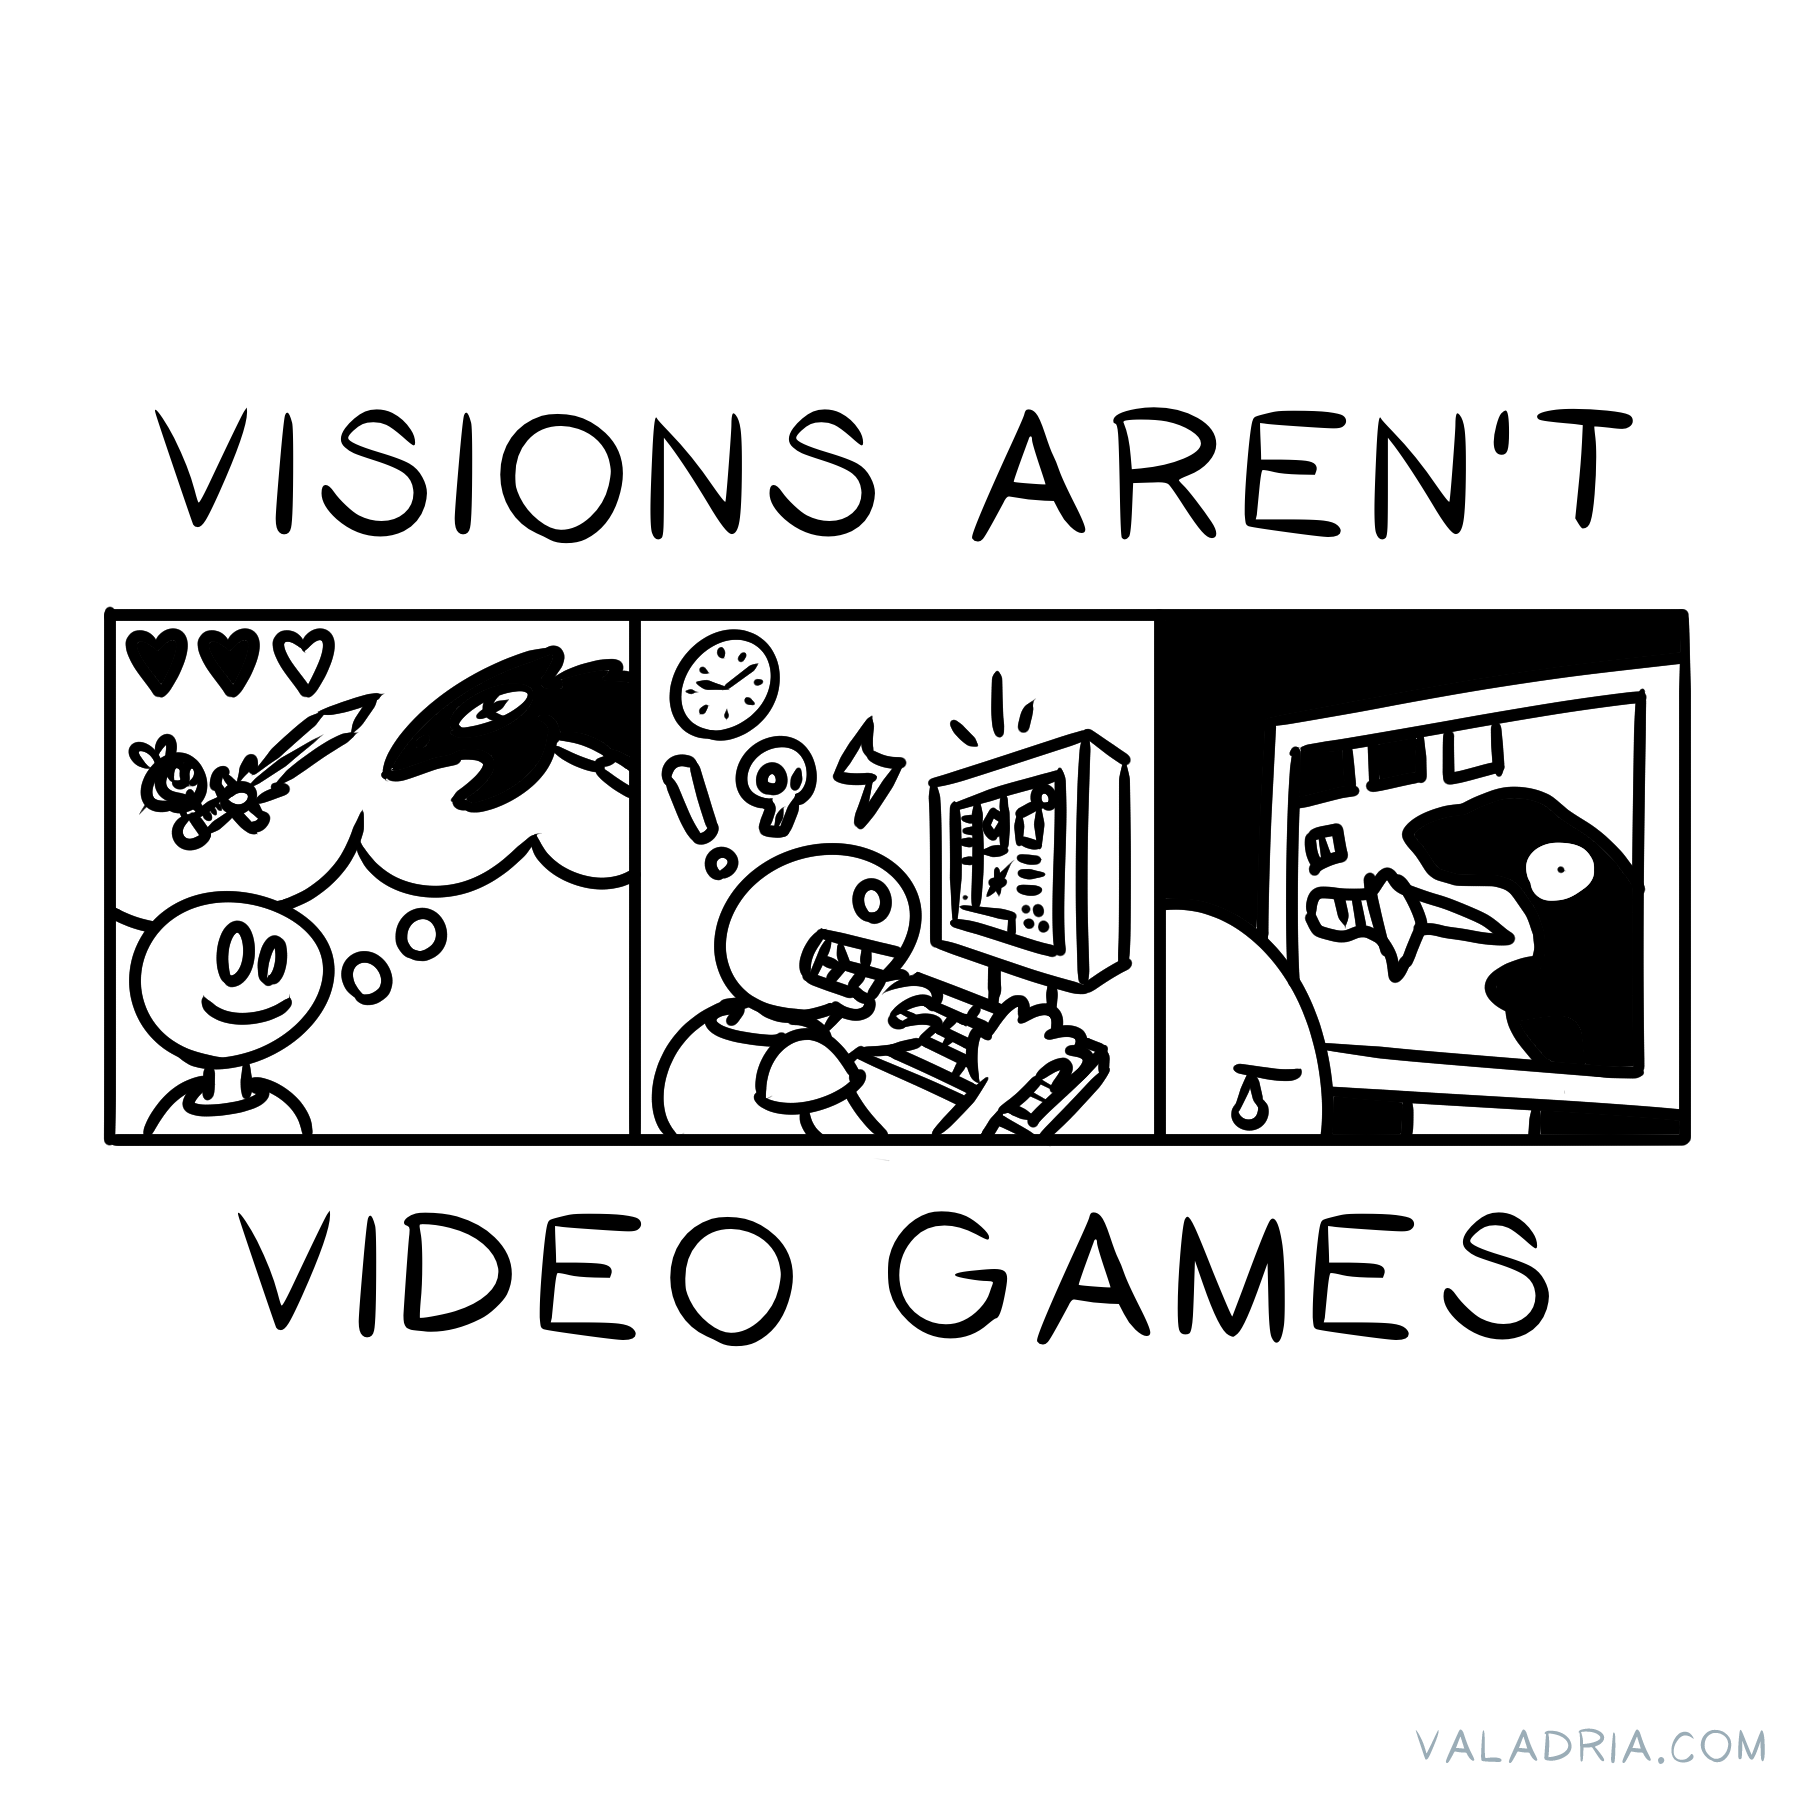 An illustration: the text "VISIONS AREN'T VIDEO GAMES" wrapped around a 3-panel comic. The first panel shows a cartoonish person imagining three cute hearts, a little bee with a cool-looking sword, and a fearsome dragon. The second panel shows this person working hard on their game for some time. The last panel shows the person sad, because their dragon looks like a sock puppet. Their game doesn't match their vision.